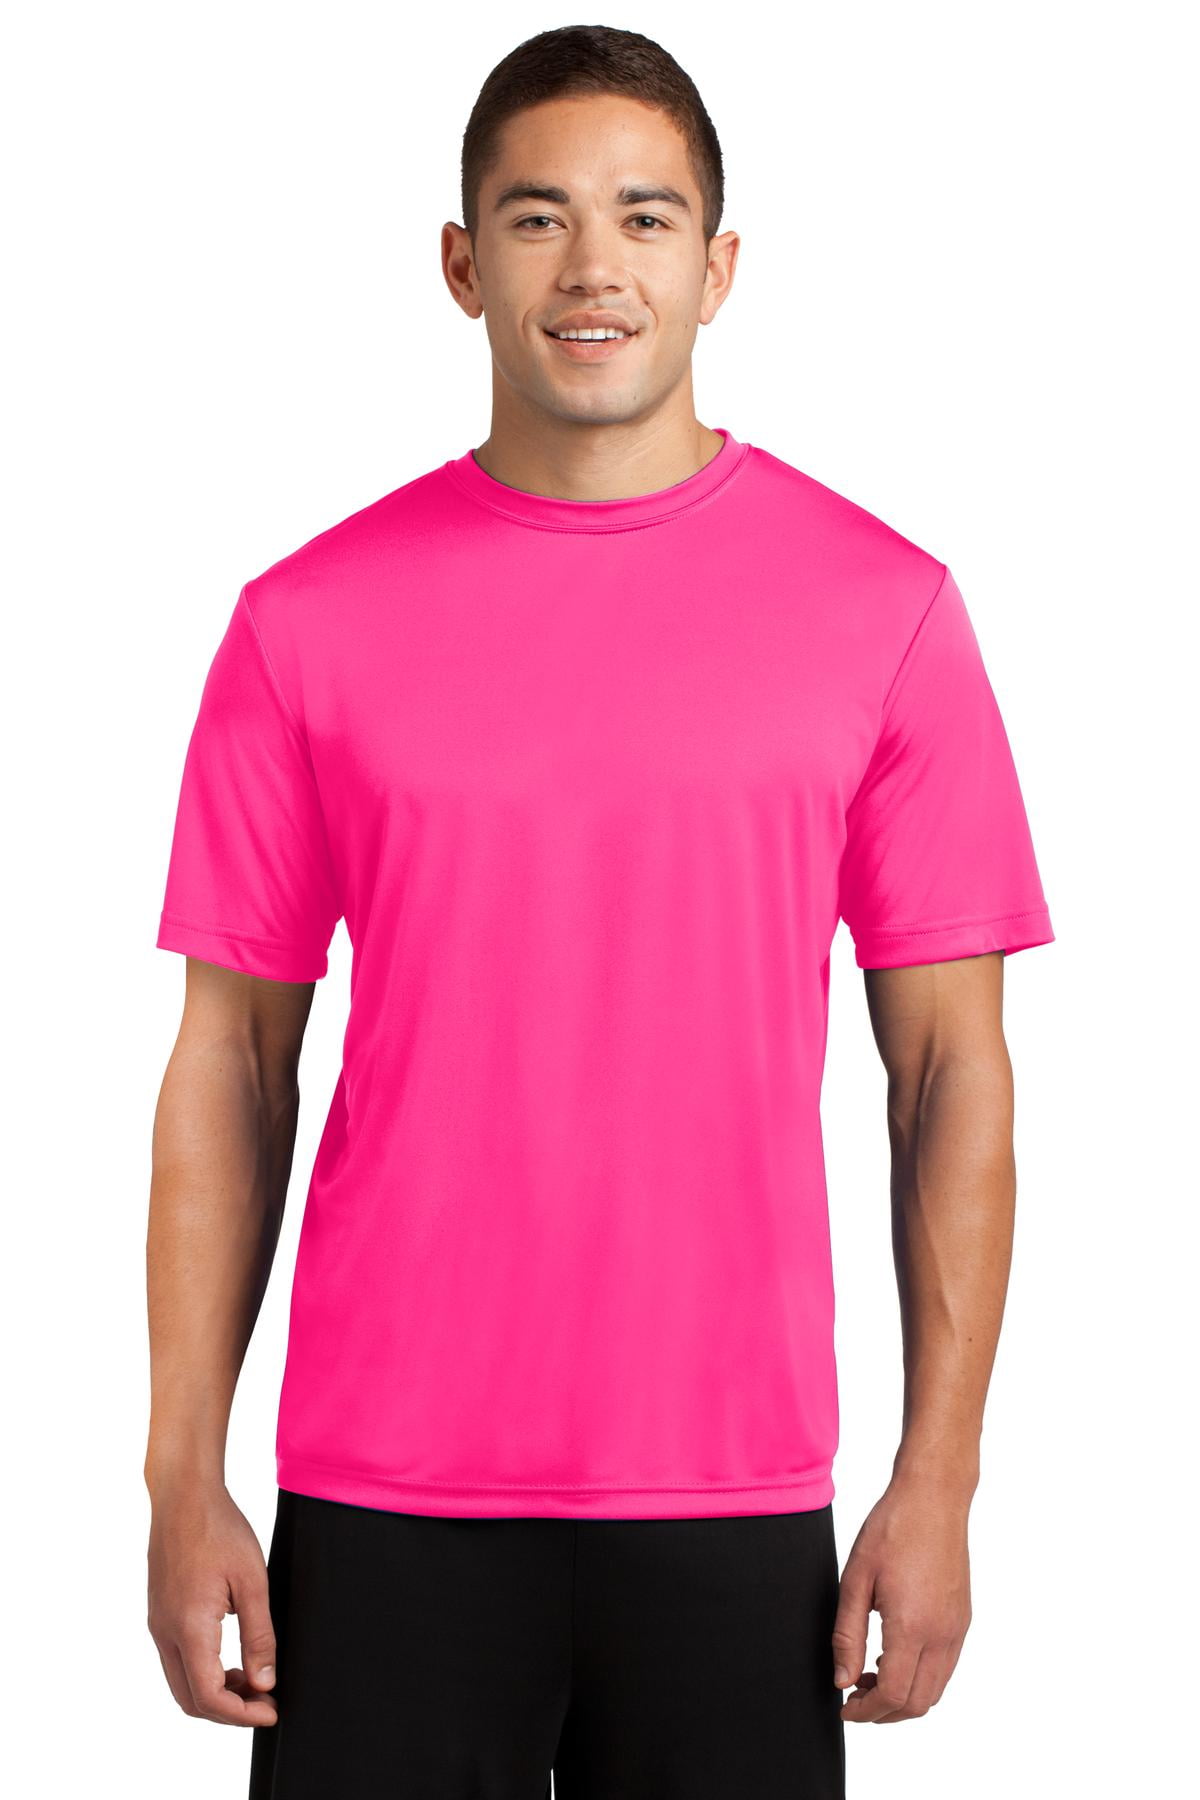 Posicharge Tee Neon - St350 - Competitor Pink Sport-Tek L